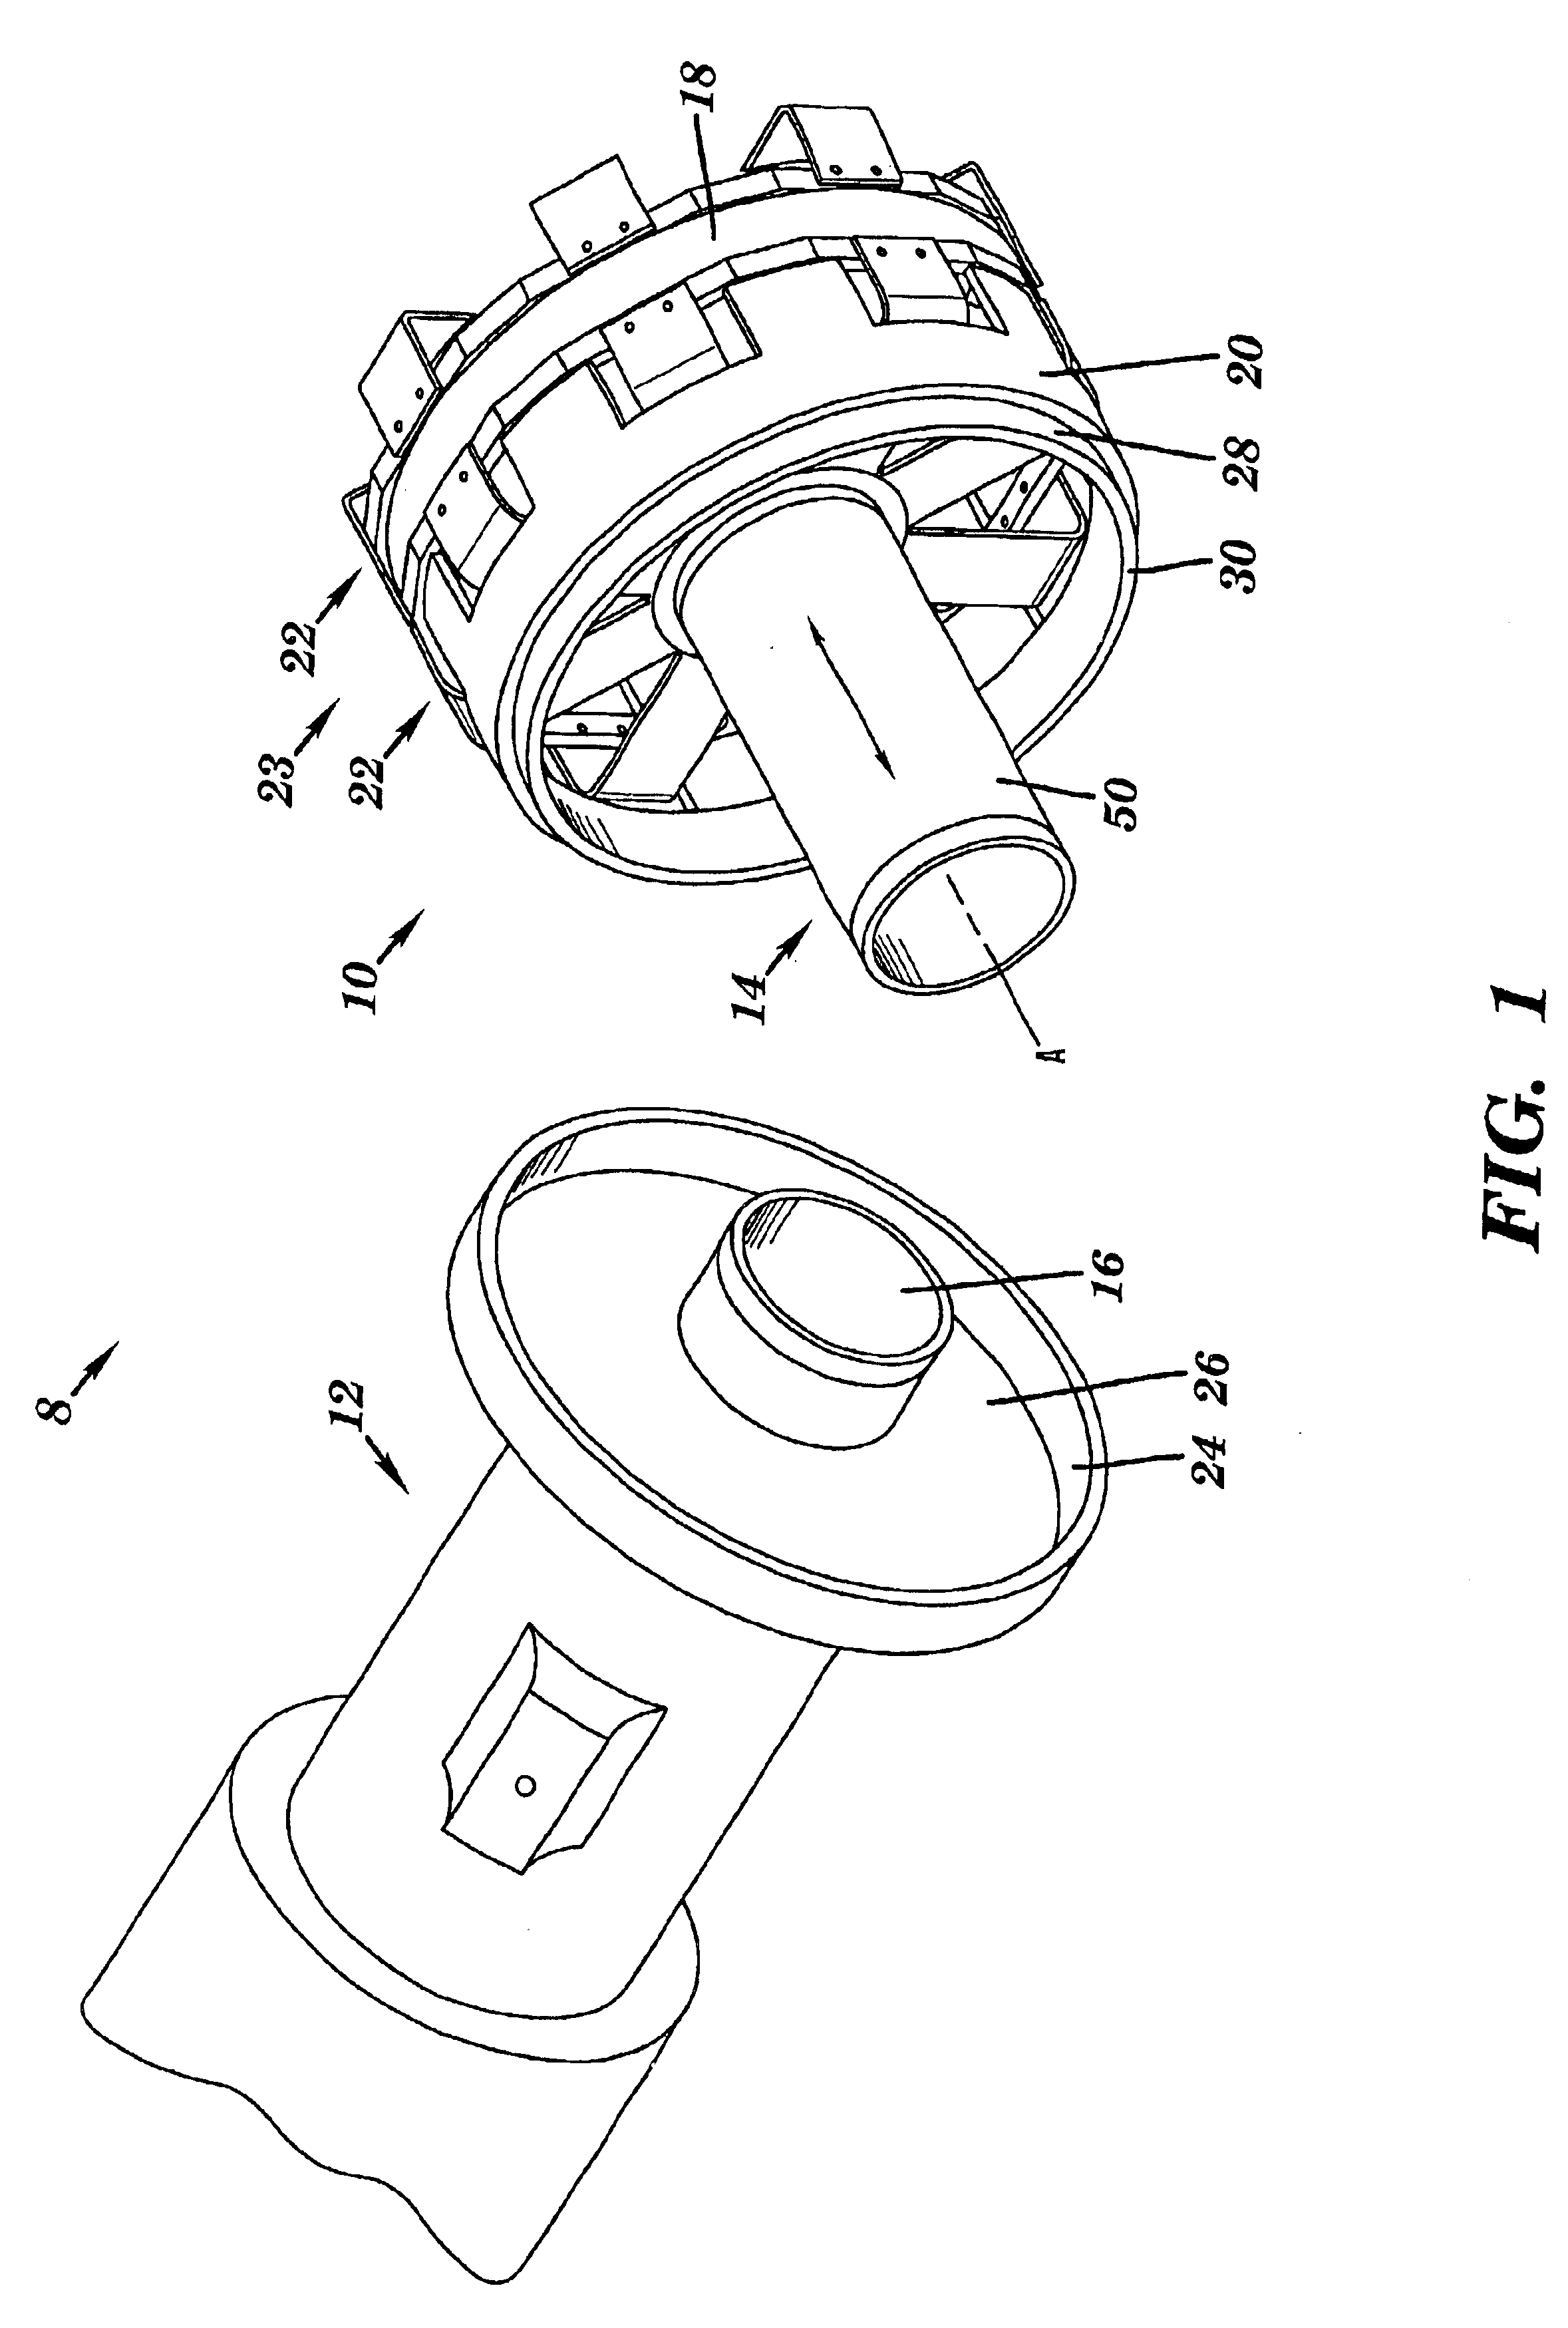 Reciprocating device and linear suspension